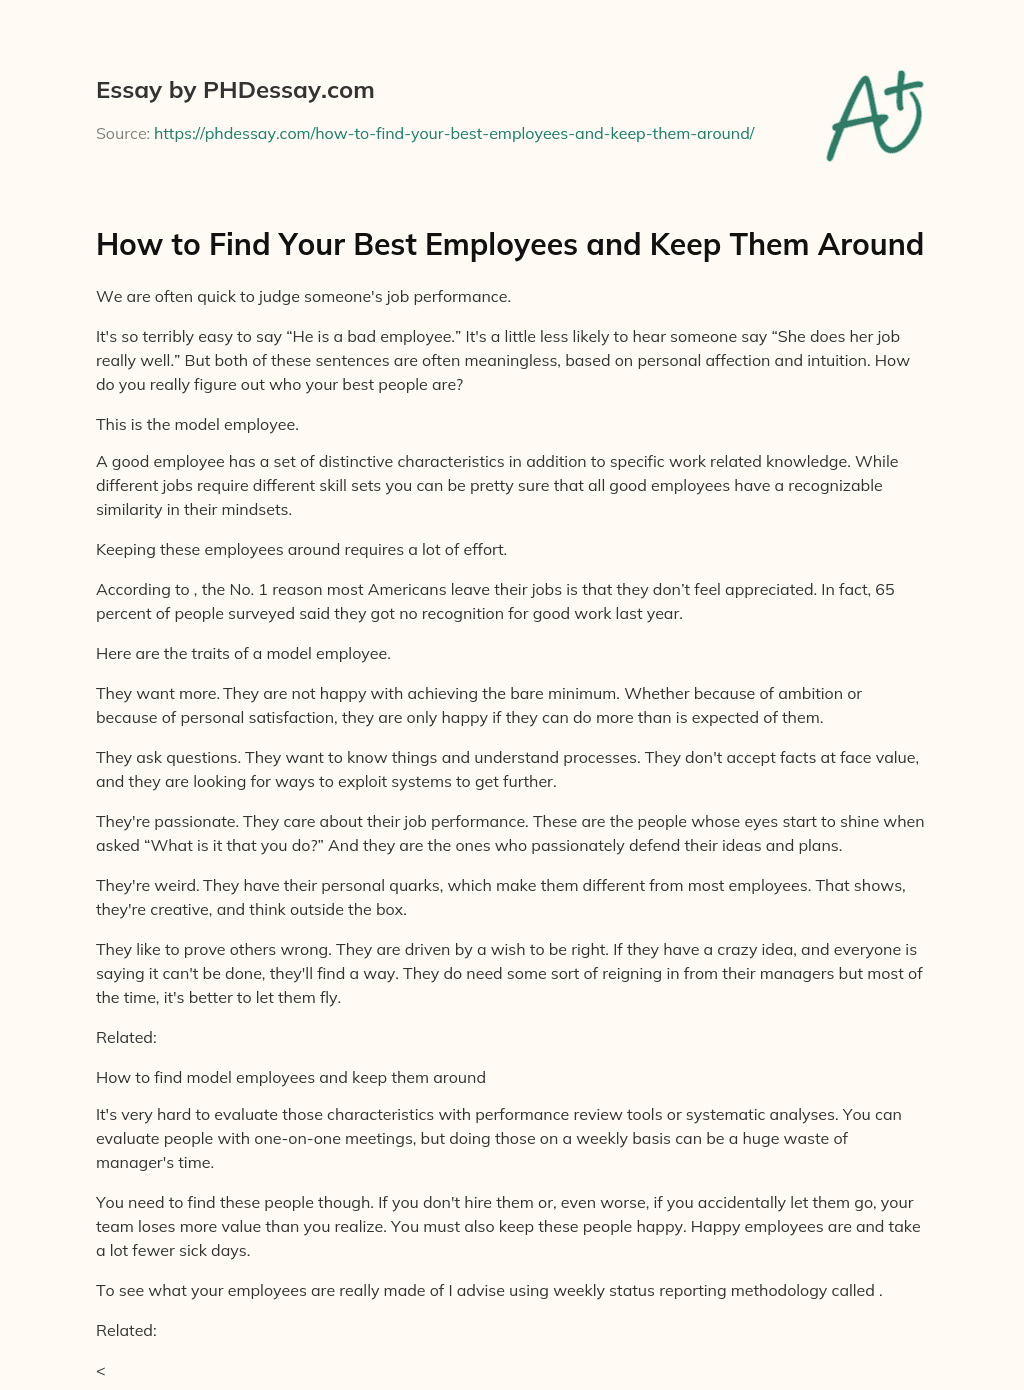 How to Find Your Best Employees and Keep Them Around essay